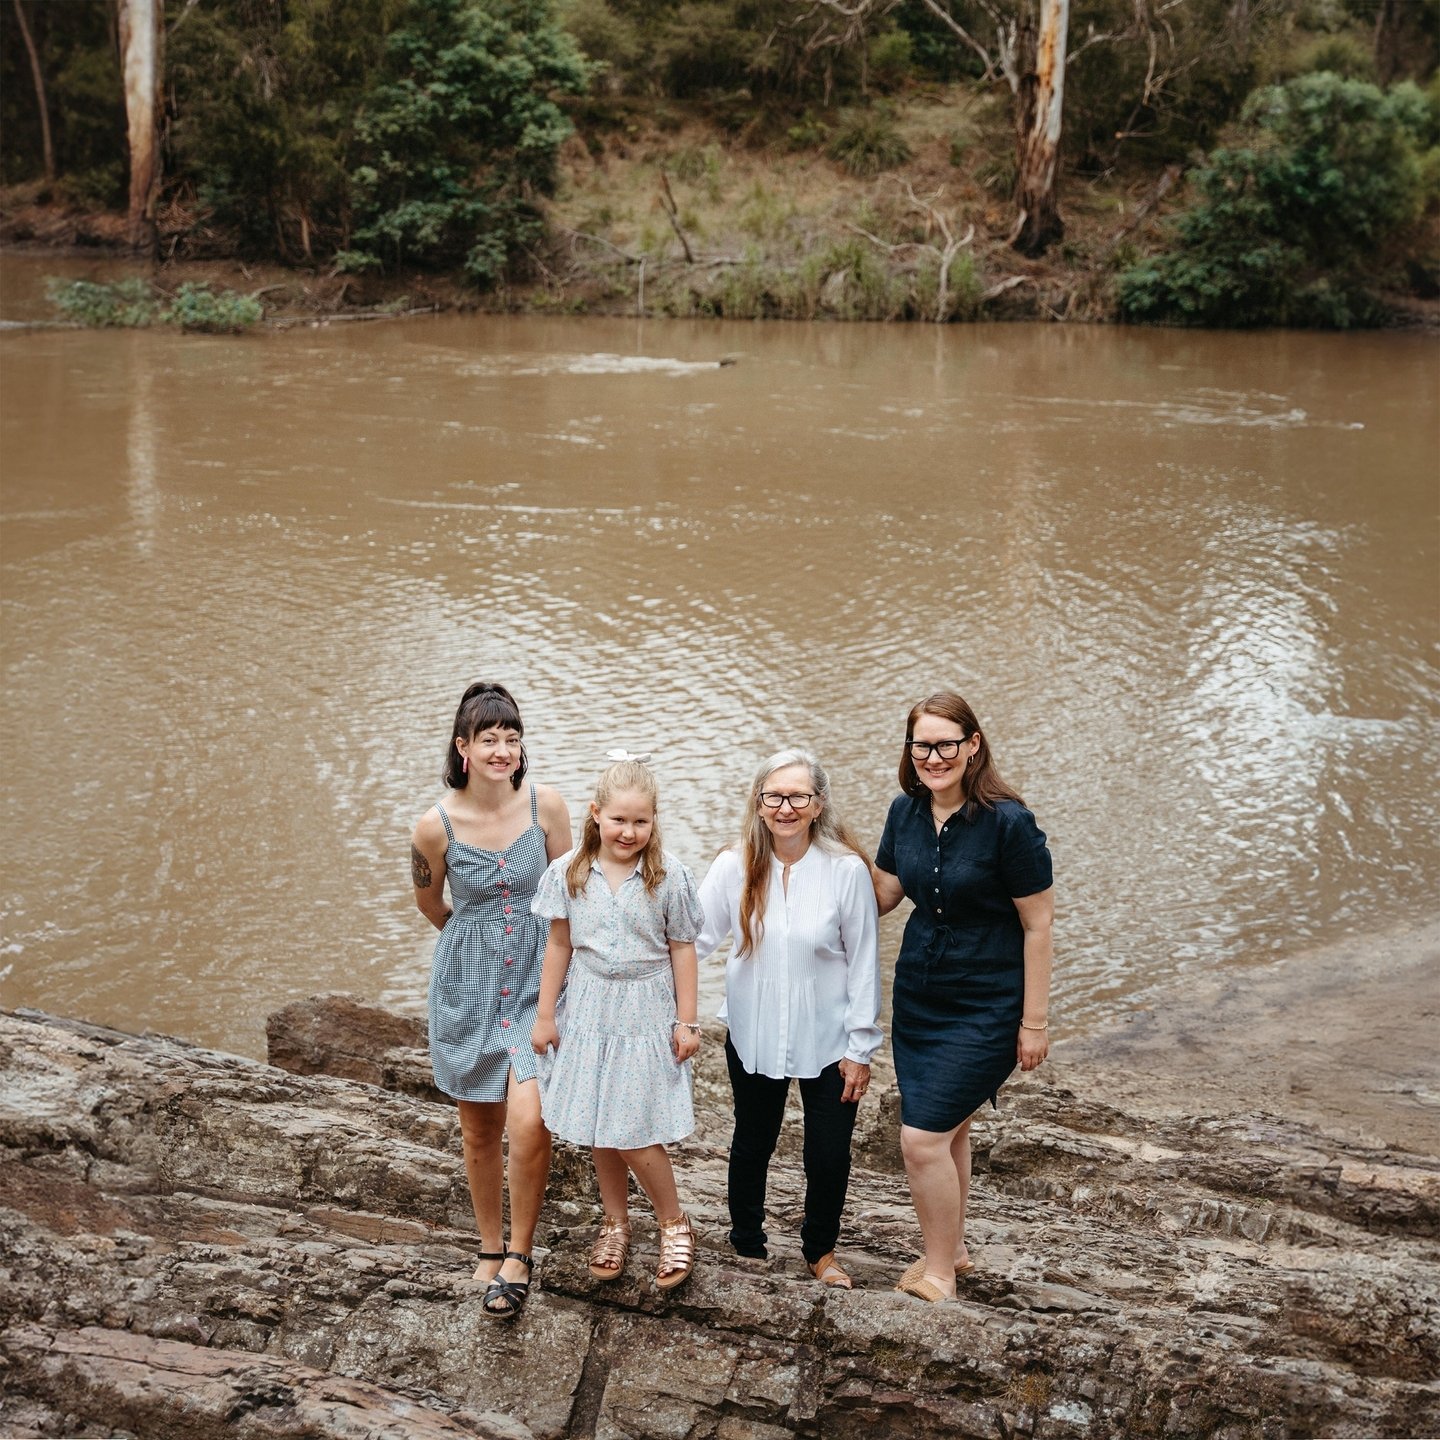 Some strong ladies I know 💪
Myself, my niece, my mum and my sister.
Hanging by the Yarra river in my home town Warrandyte, Australia 😍
...That murky brown river water... seems so Australian now... and such a delight to swim in!